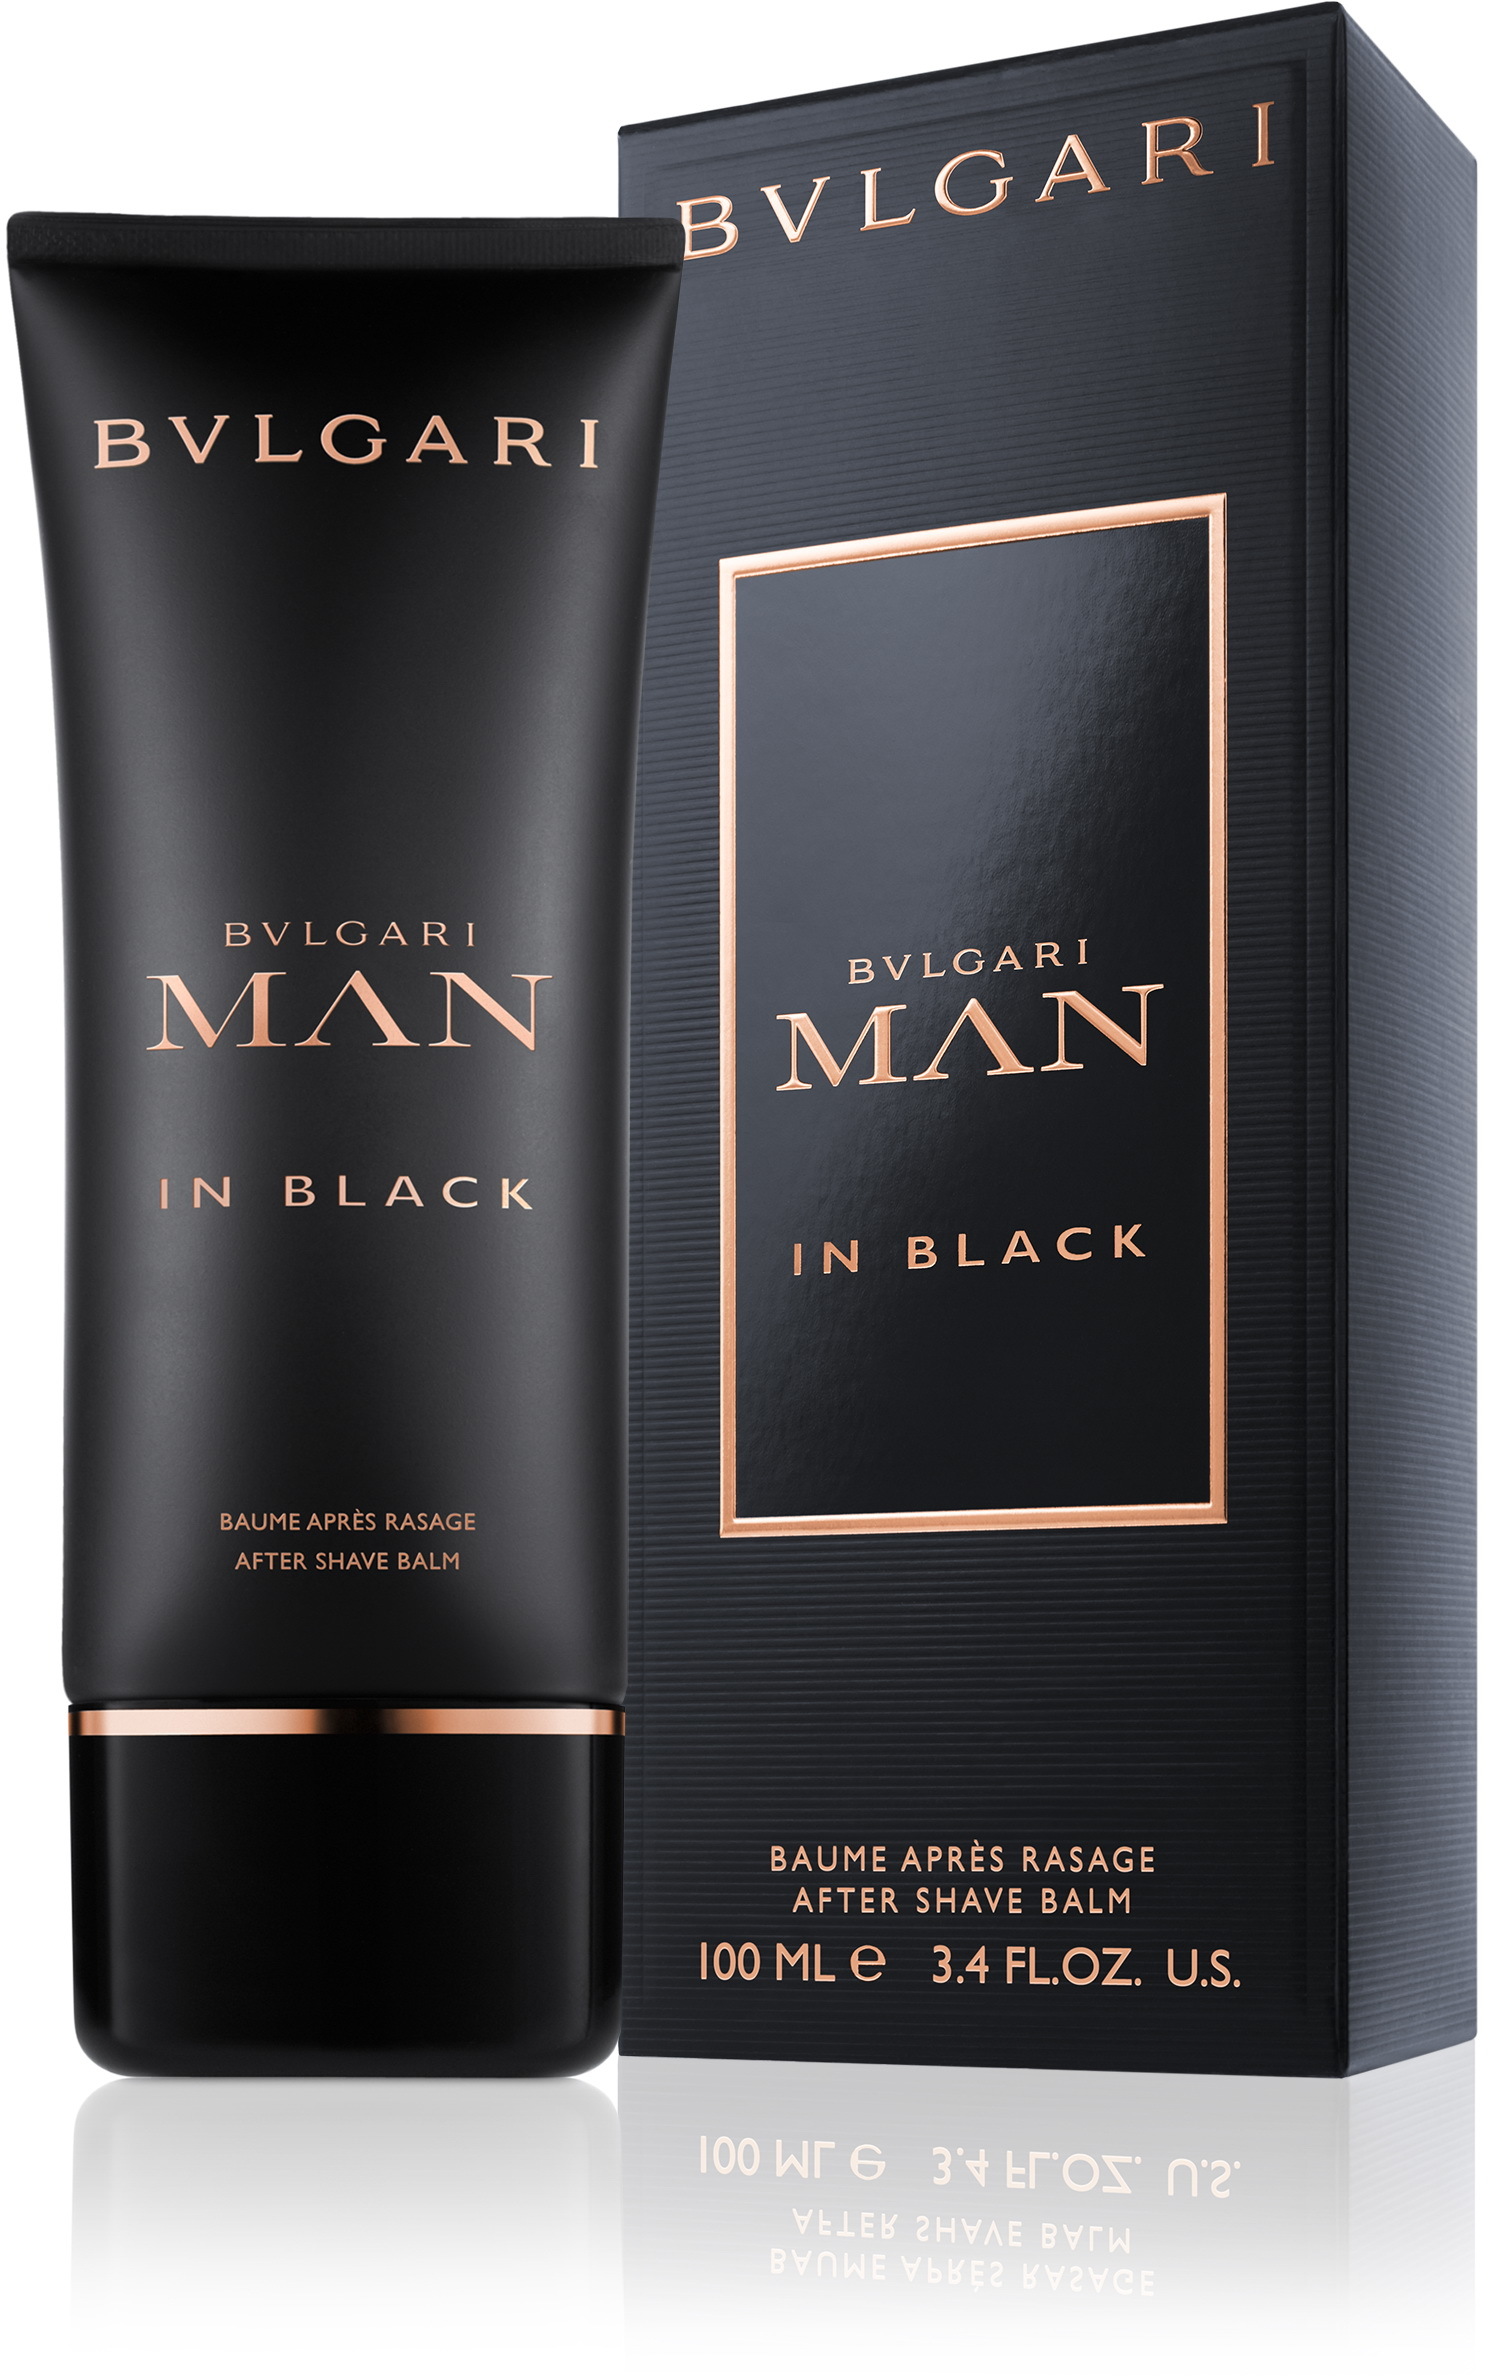 bvlgari man in black after shave balm 100ml